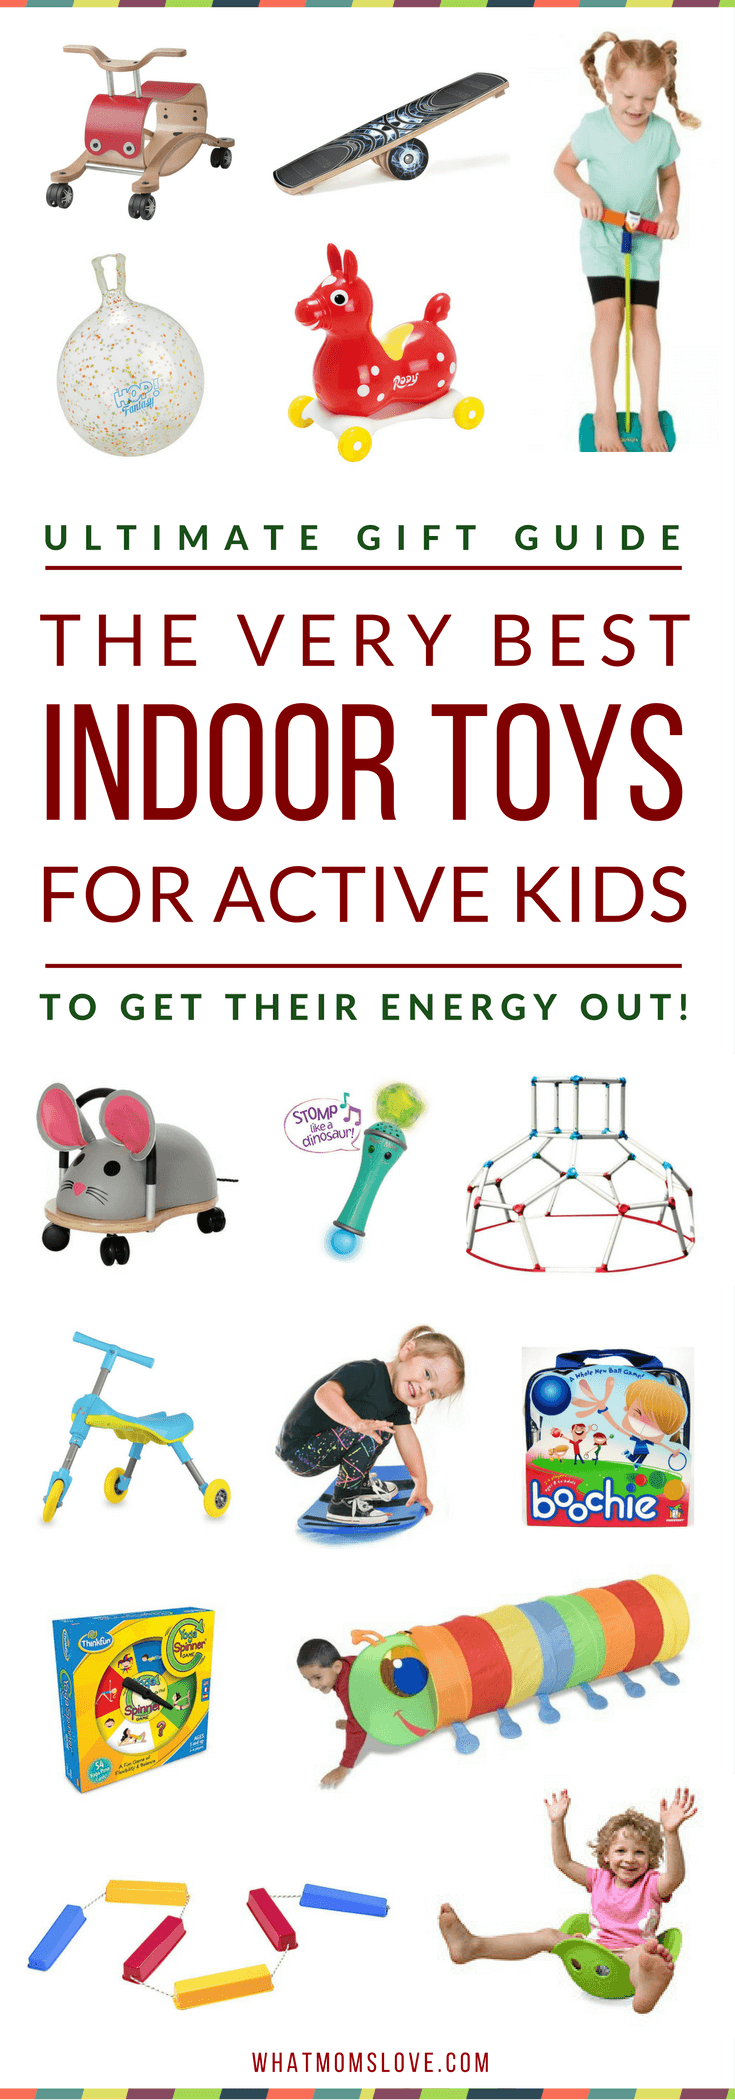 Best Indoor Gross Motor Toys For Active Kids | Toys To Help Kids Get Energy Out | Gift Ideas For Toddlers for Fun Active Play - Perfect for fighting cabin fever on rainy days or snow days!